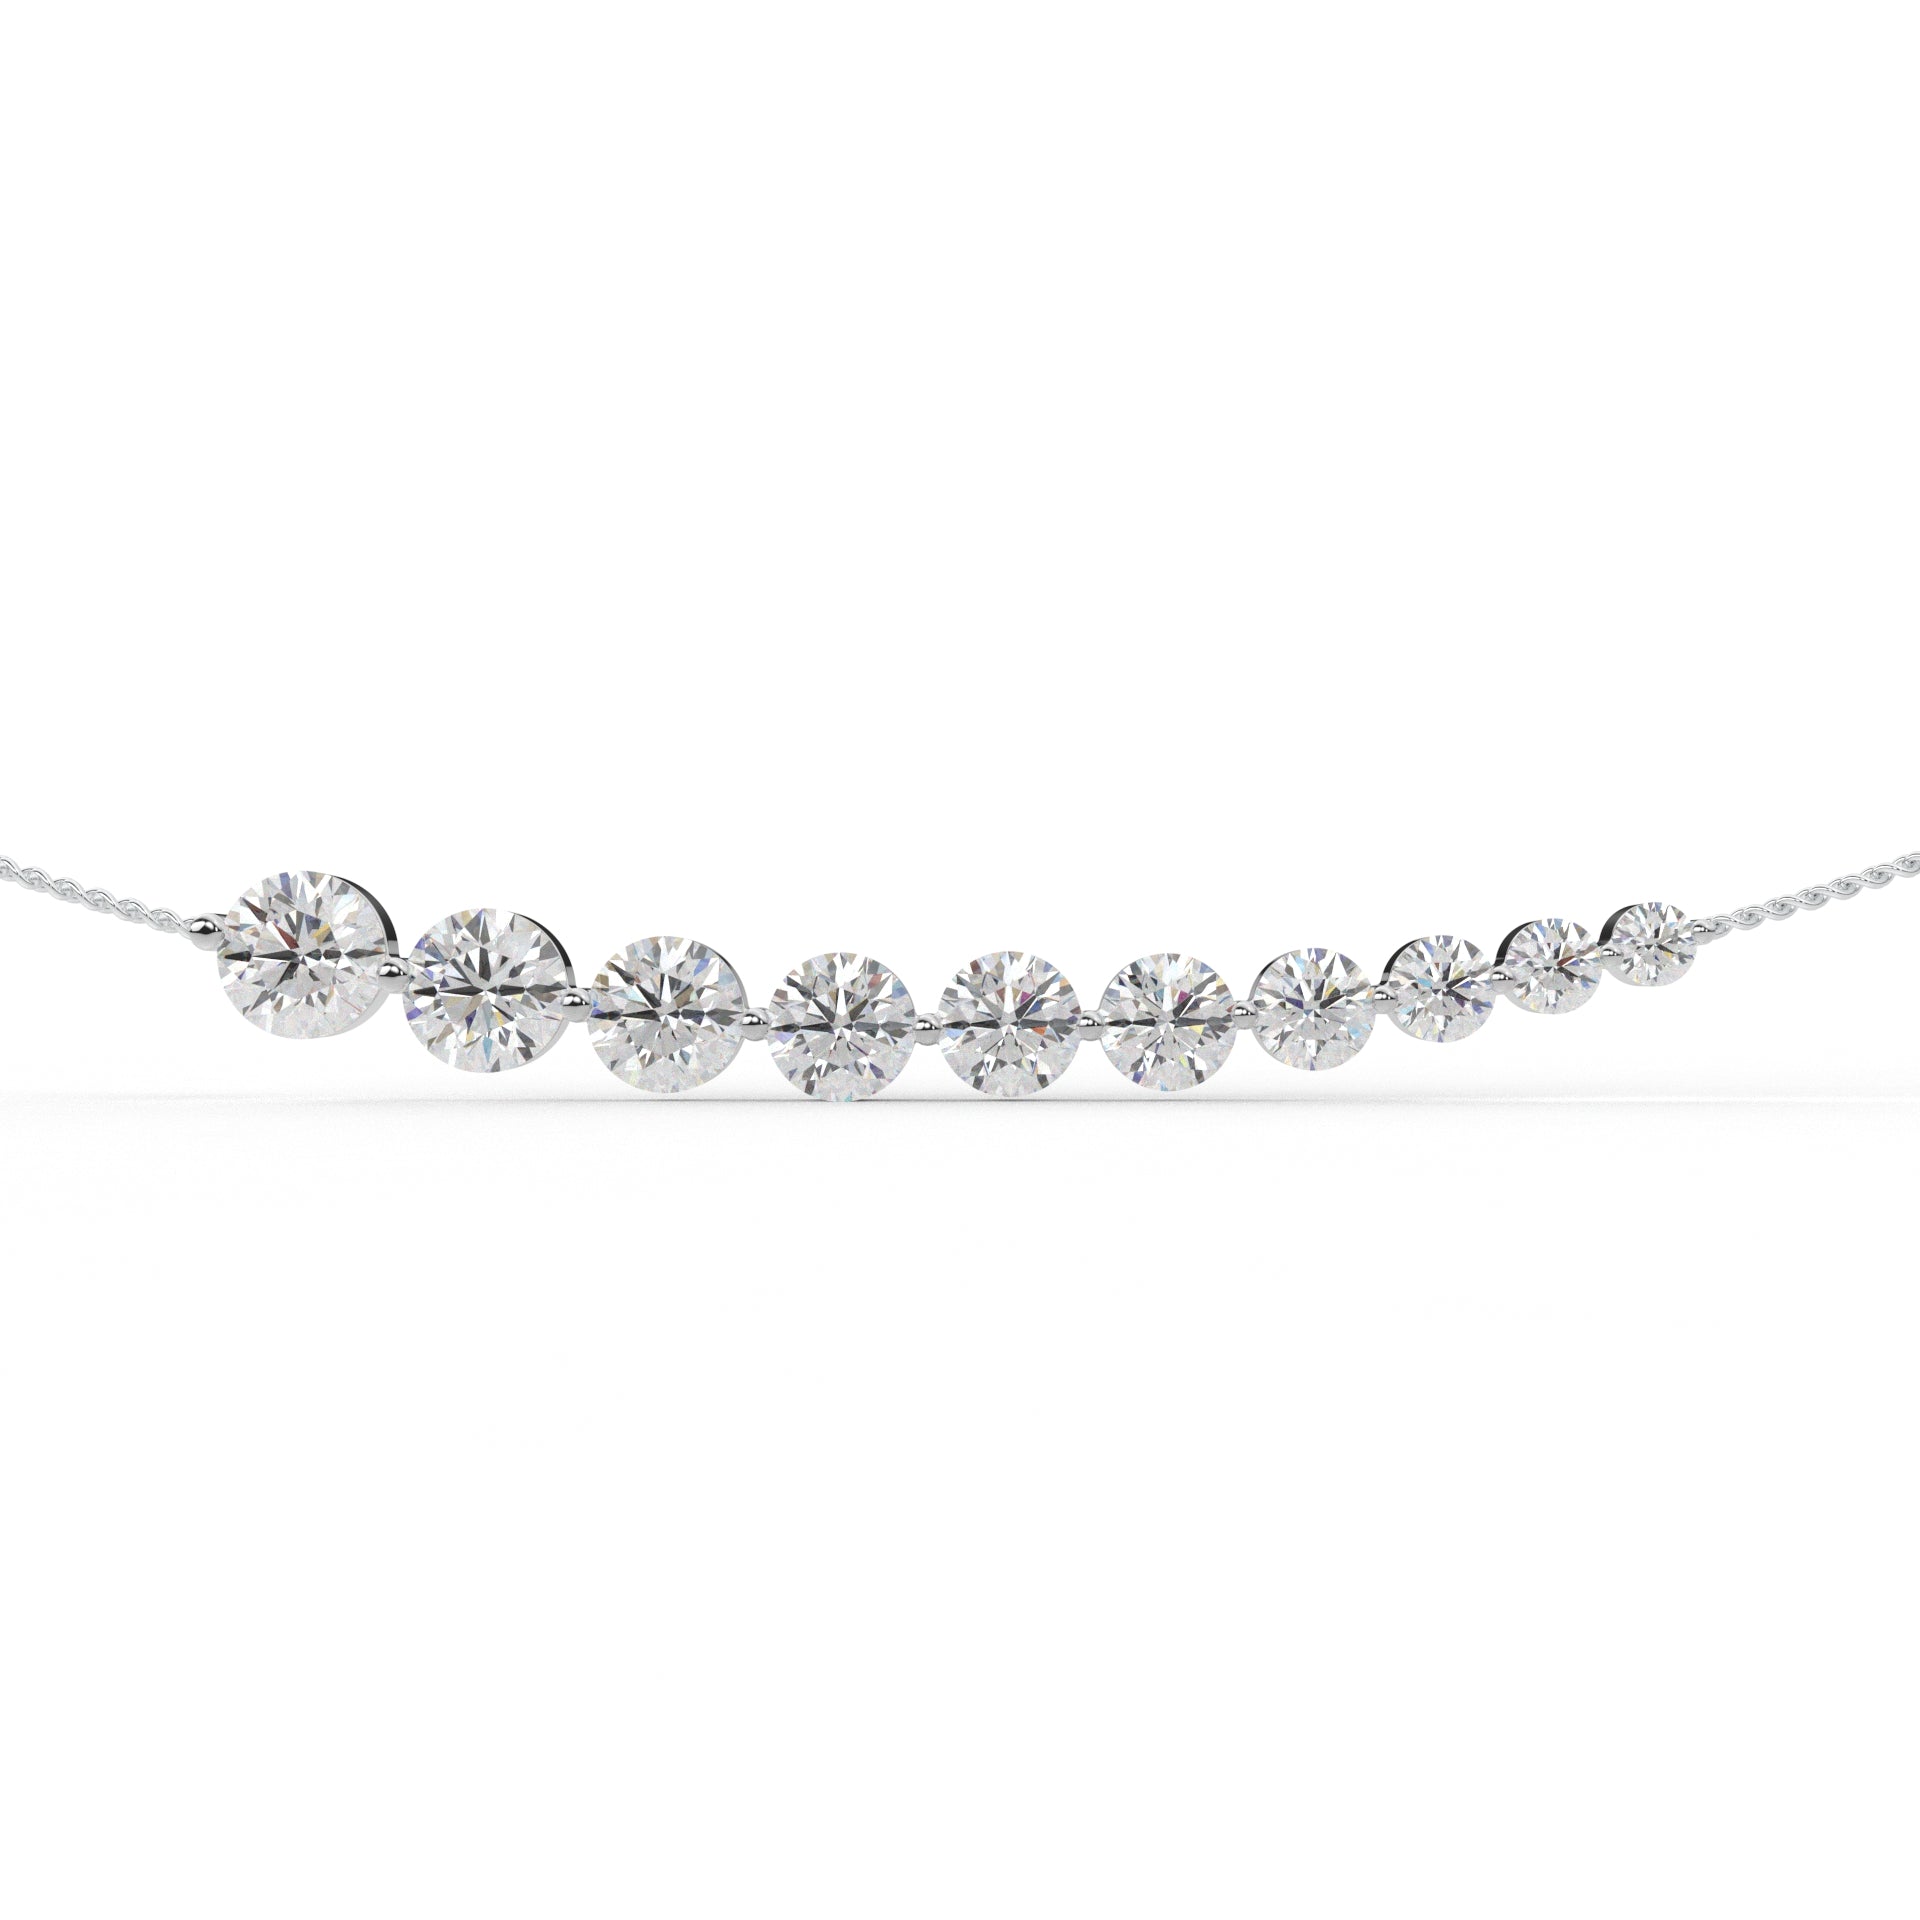 White Gold Necklaces Jewelry Sale and Clearance Jewelry Items - Macy's